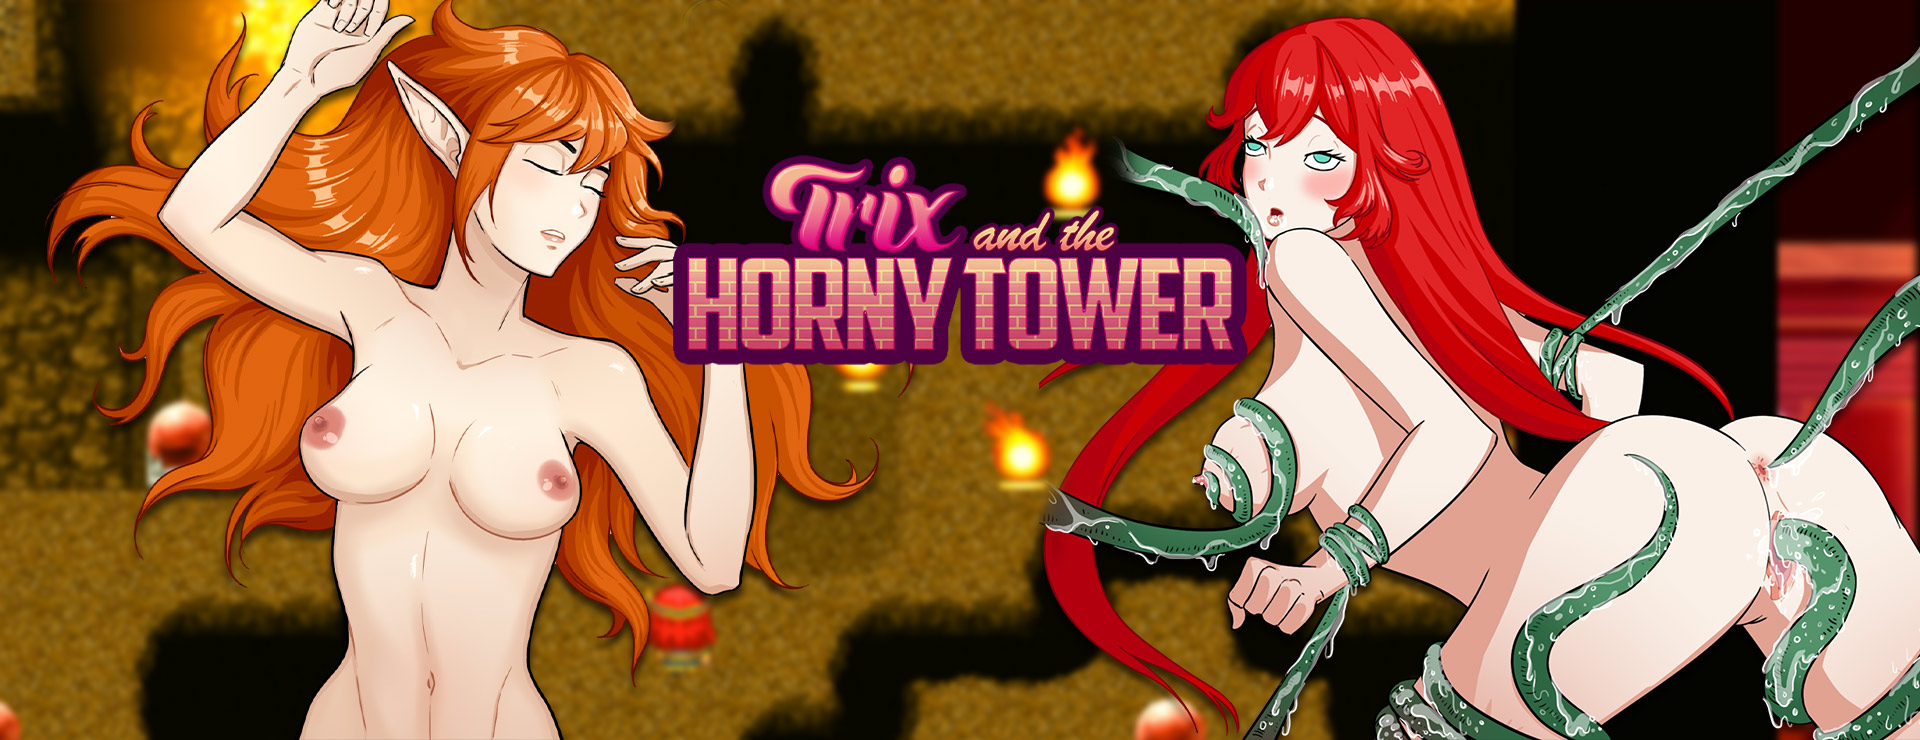 Trix and the Horny Tower - 角色扮演 遊戲